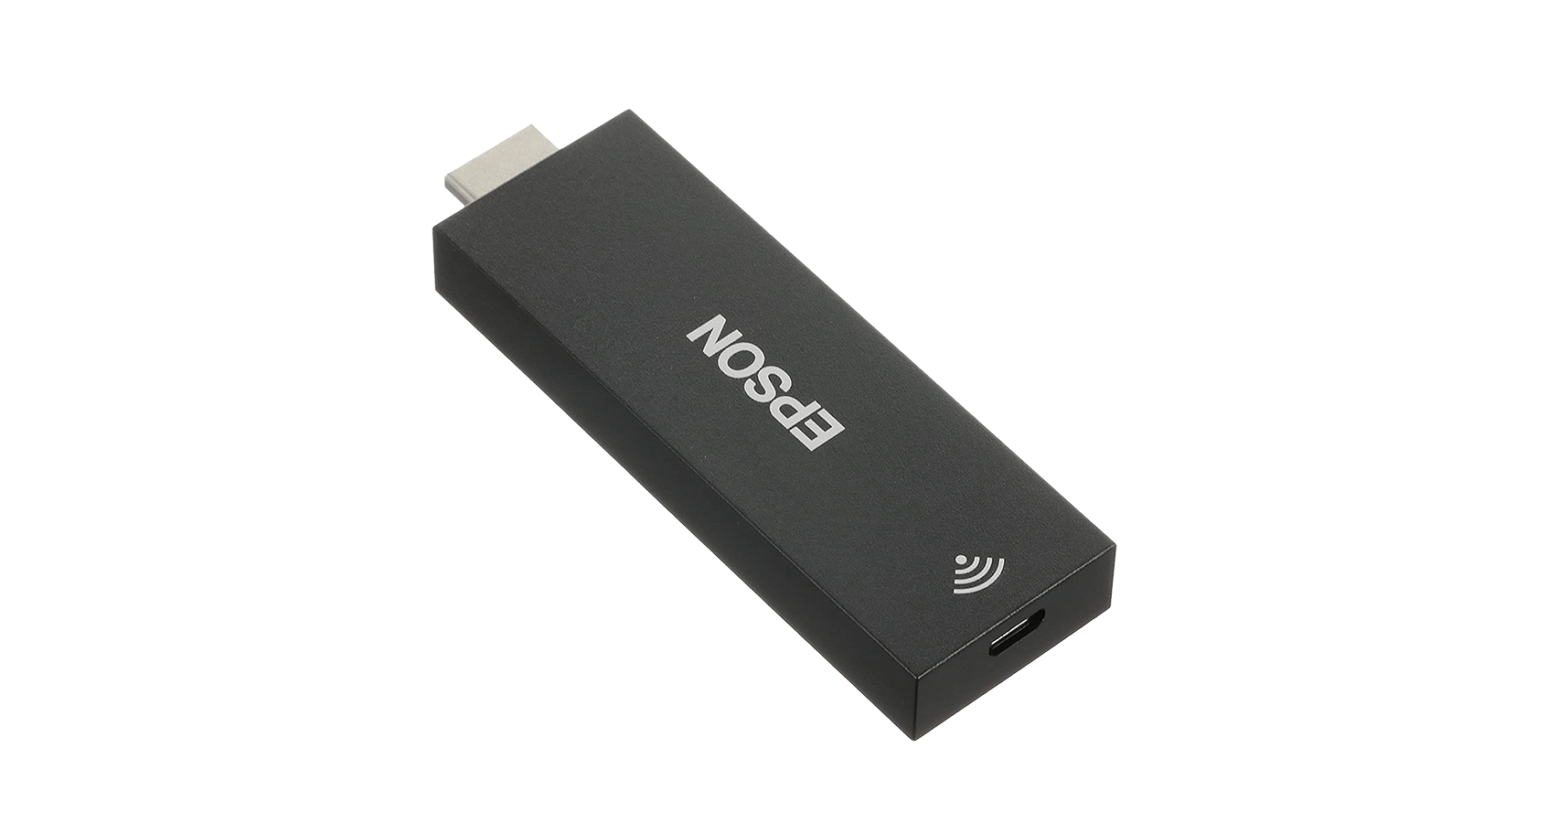 EPSON ELPAP12 Android TV Dongle User Guide